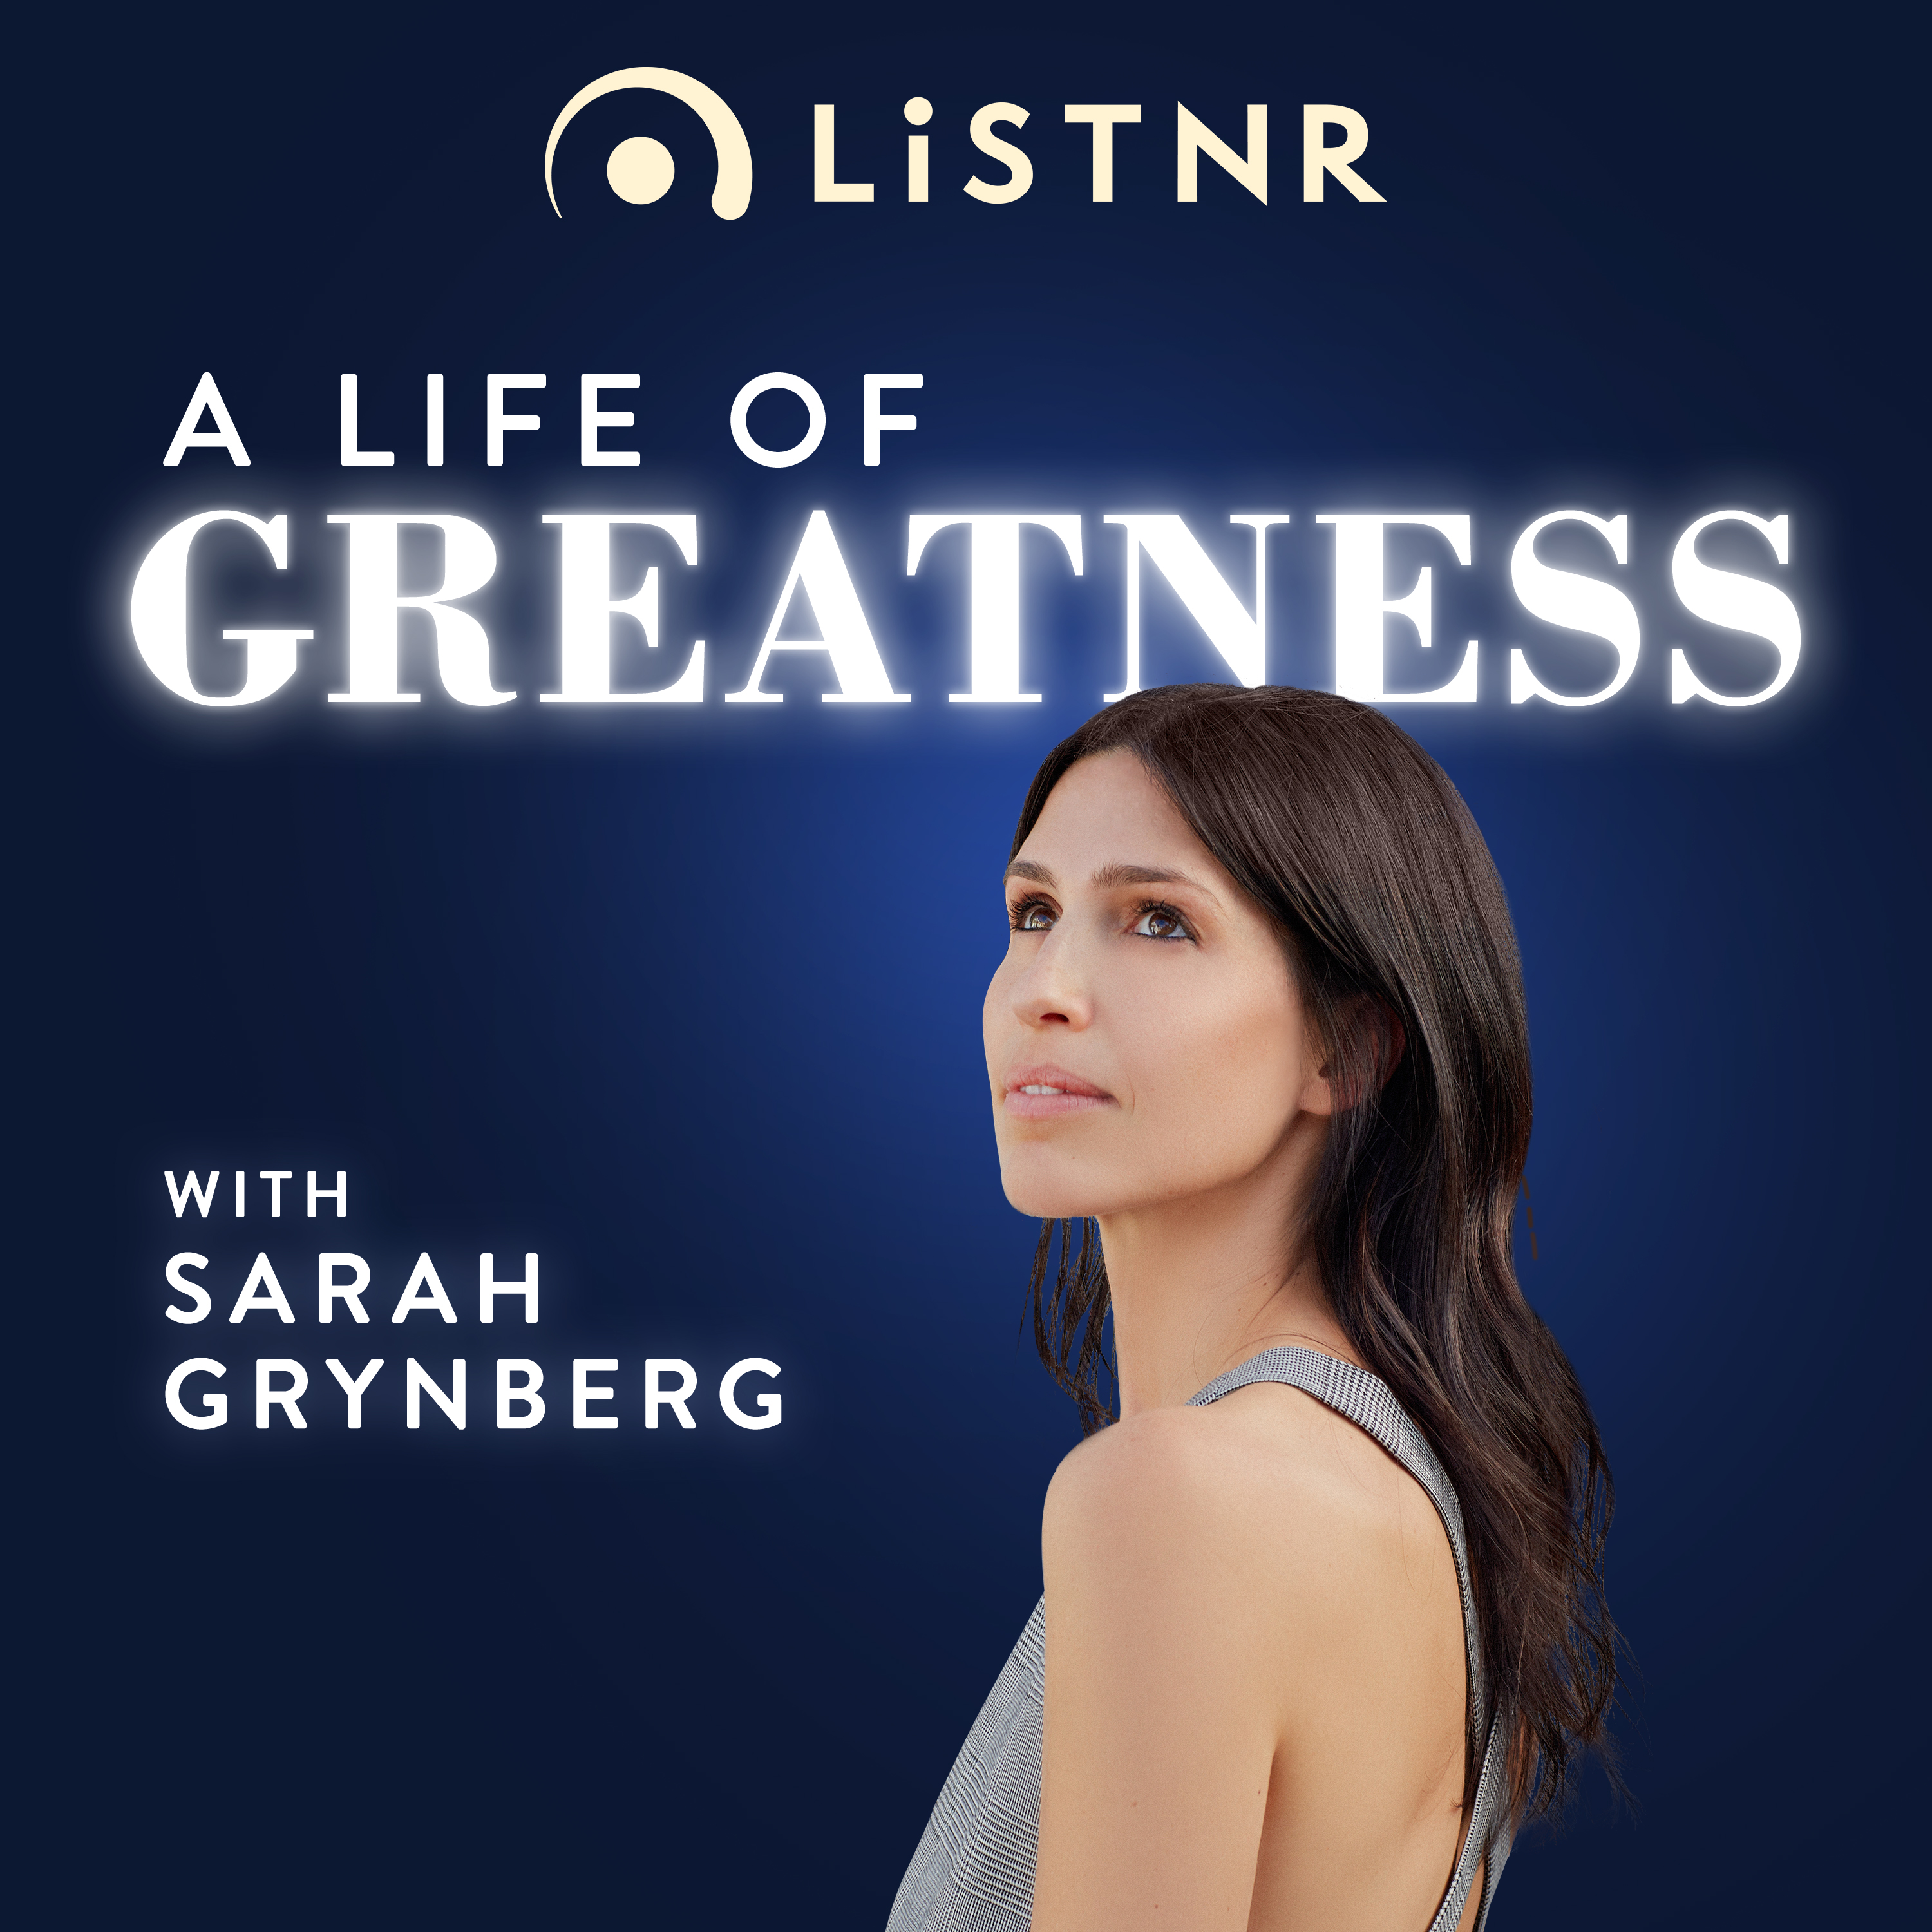 Sarah's Greatness: 'I don’t have a life outside of my kids'